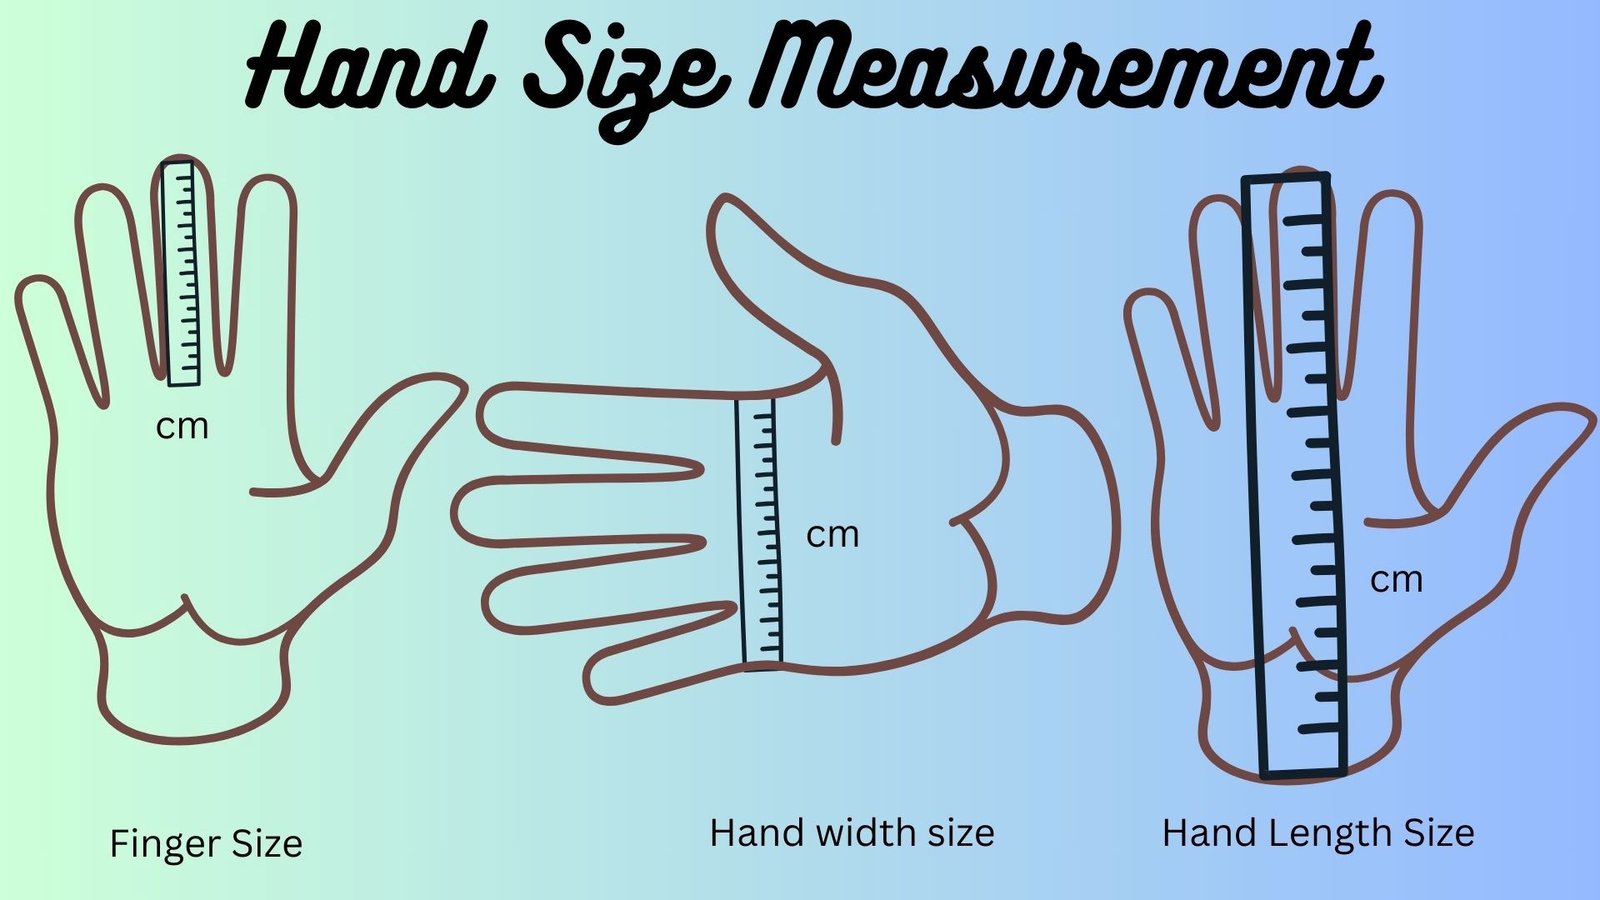 Learn how to measure your hand for the perfect gloves with this step-by-step guide. Say goodbye to uncomfortable.